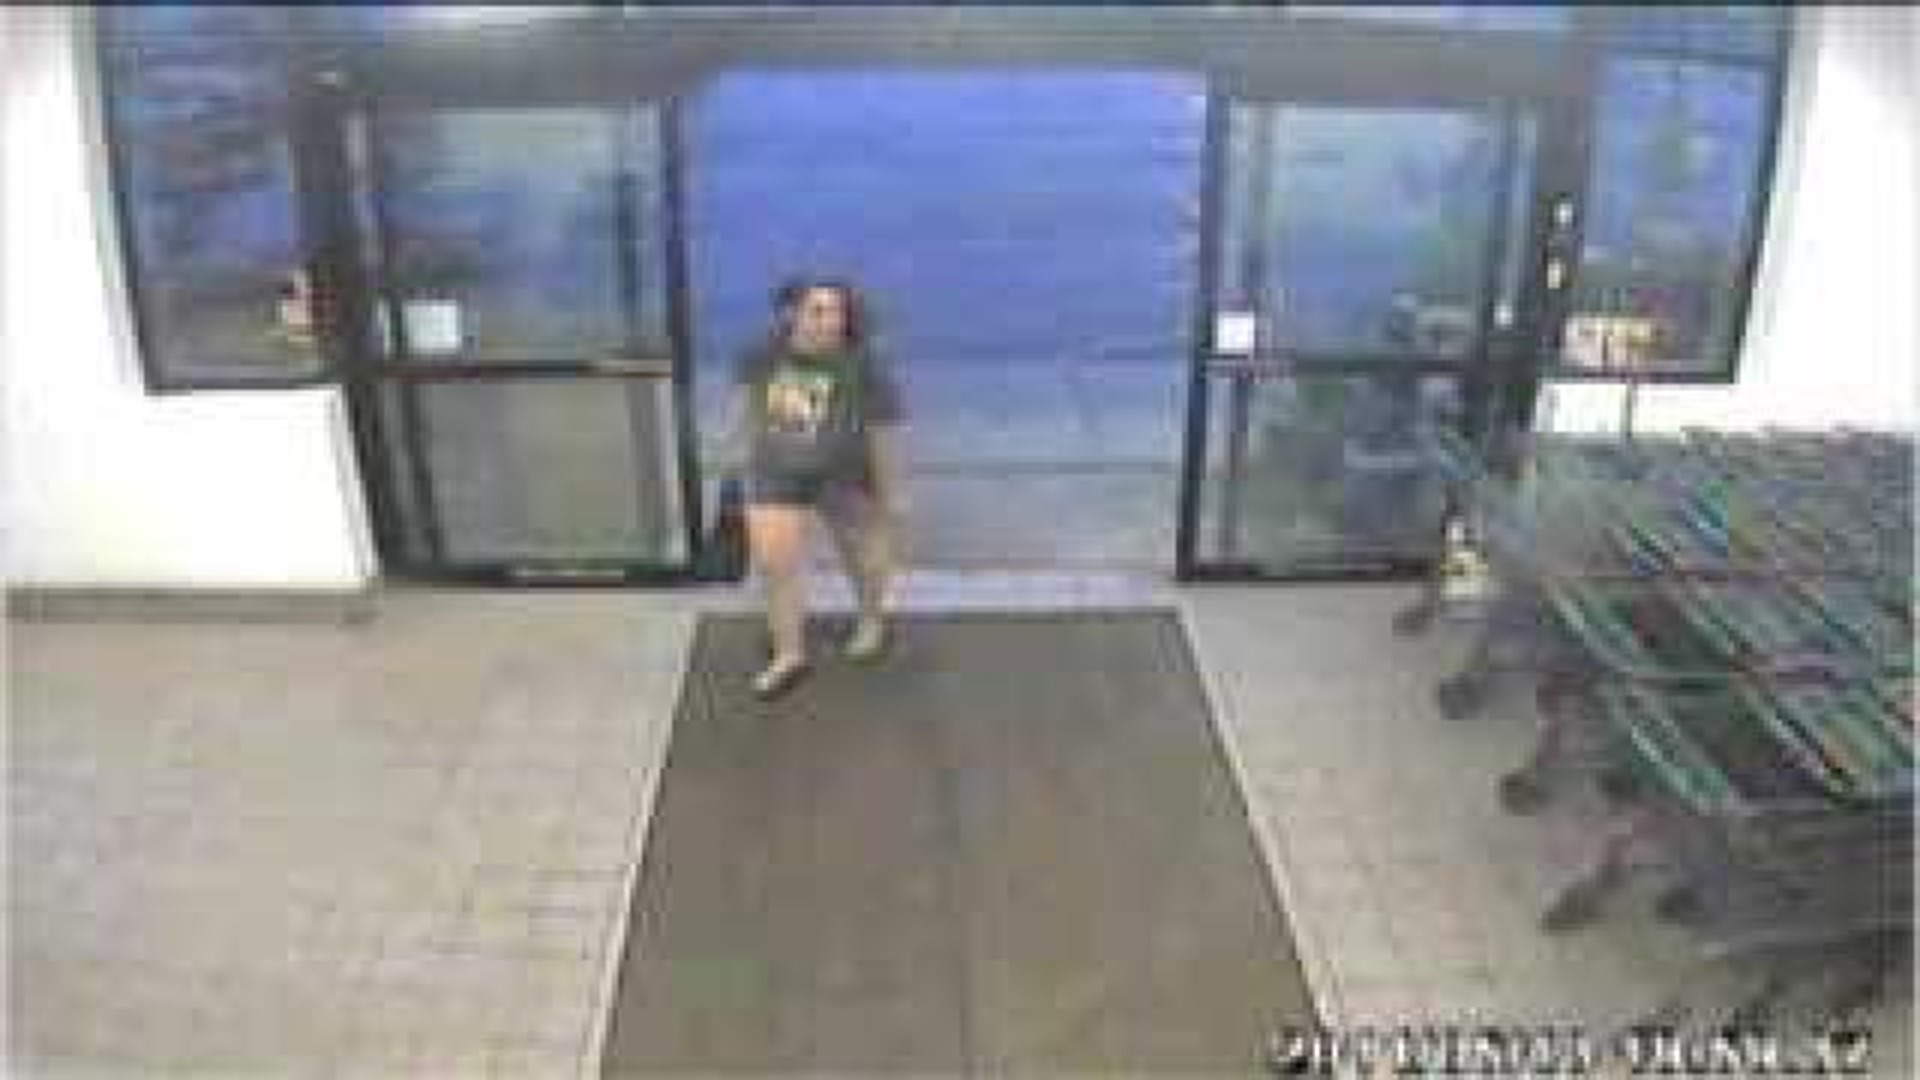 Surveillance Video of Amy Pitzen at grocery store